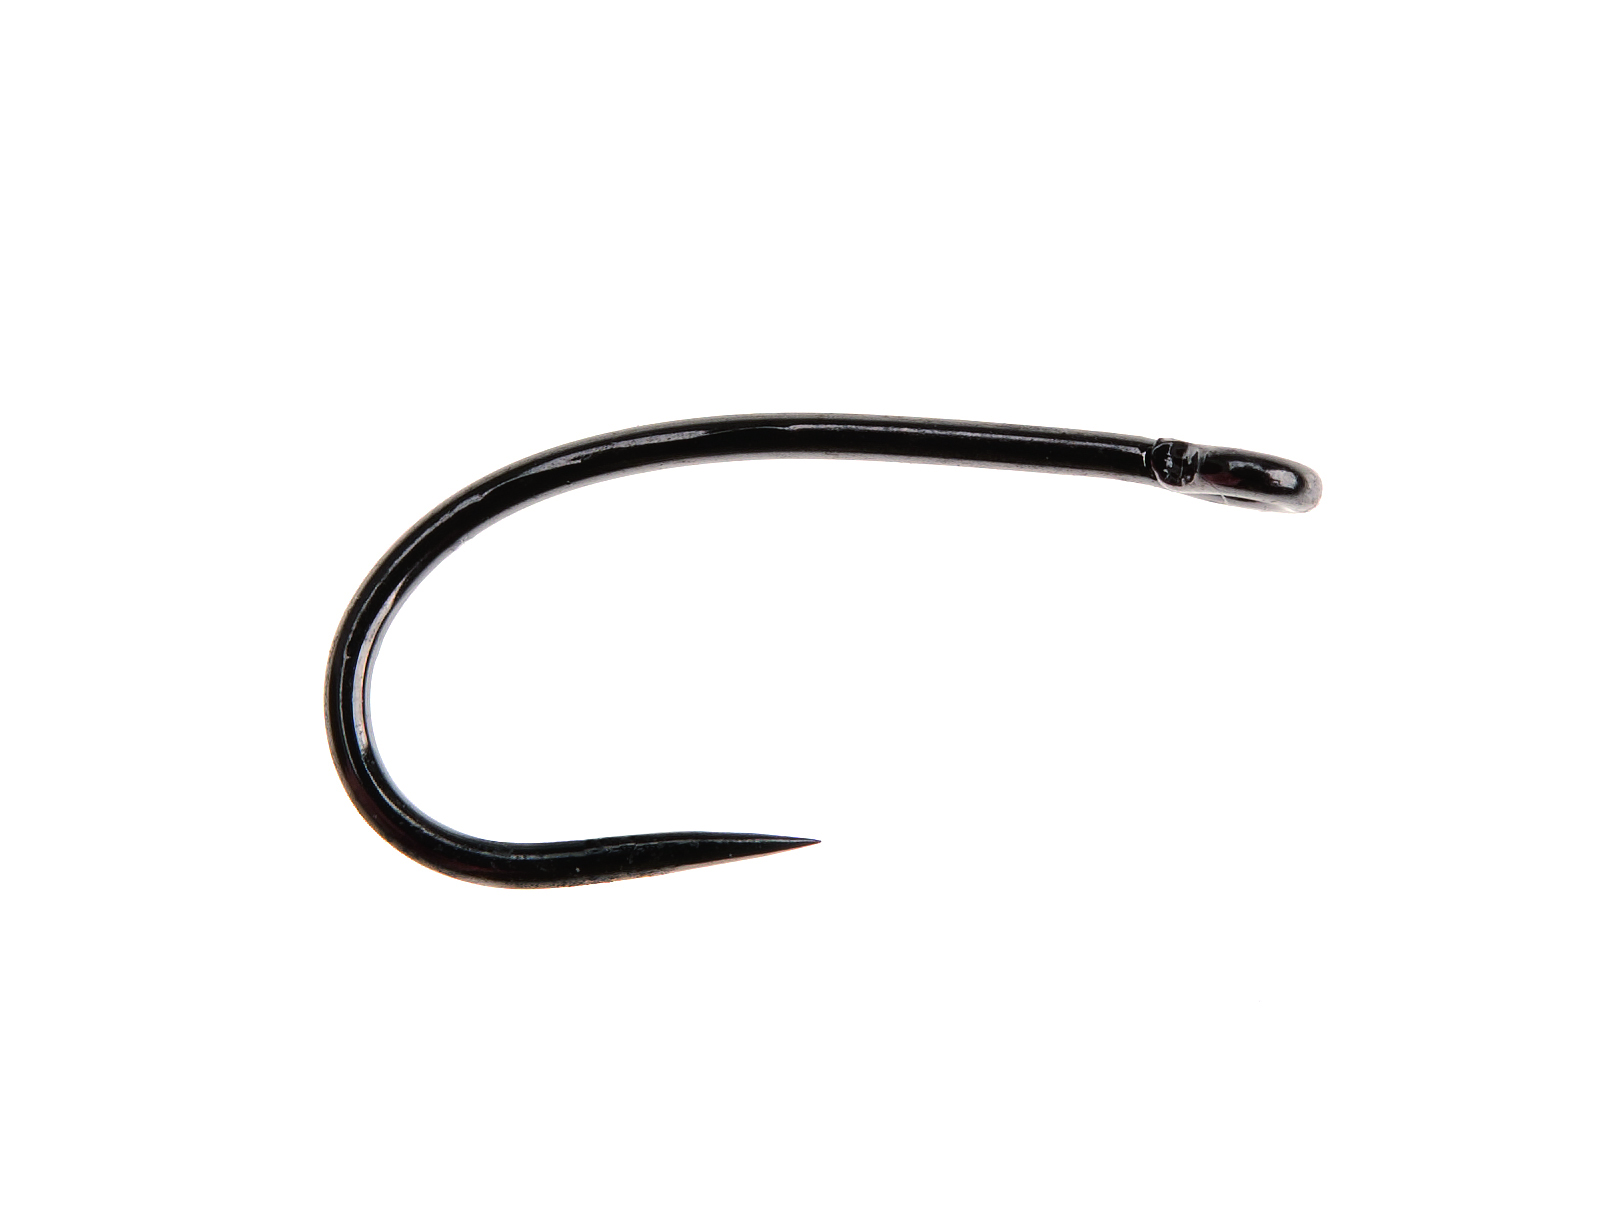 Ahrex FW511 #18 Curved Dry Barbless